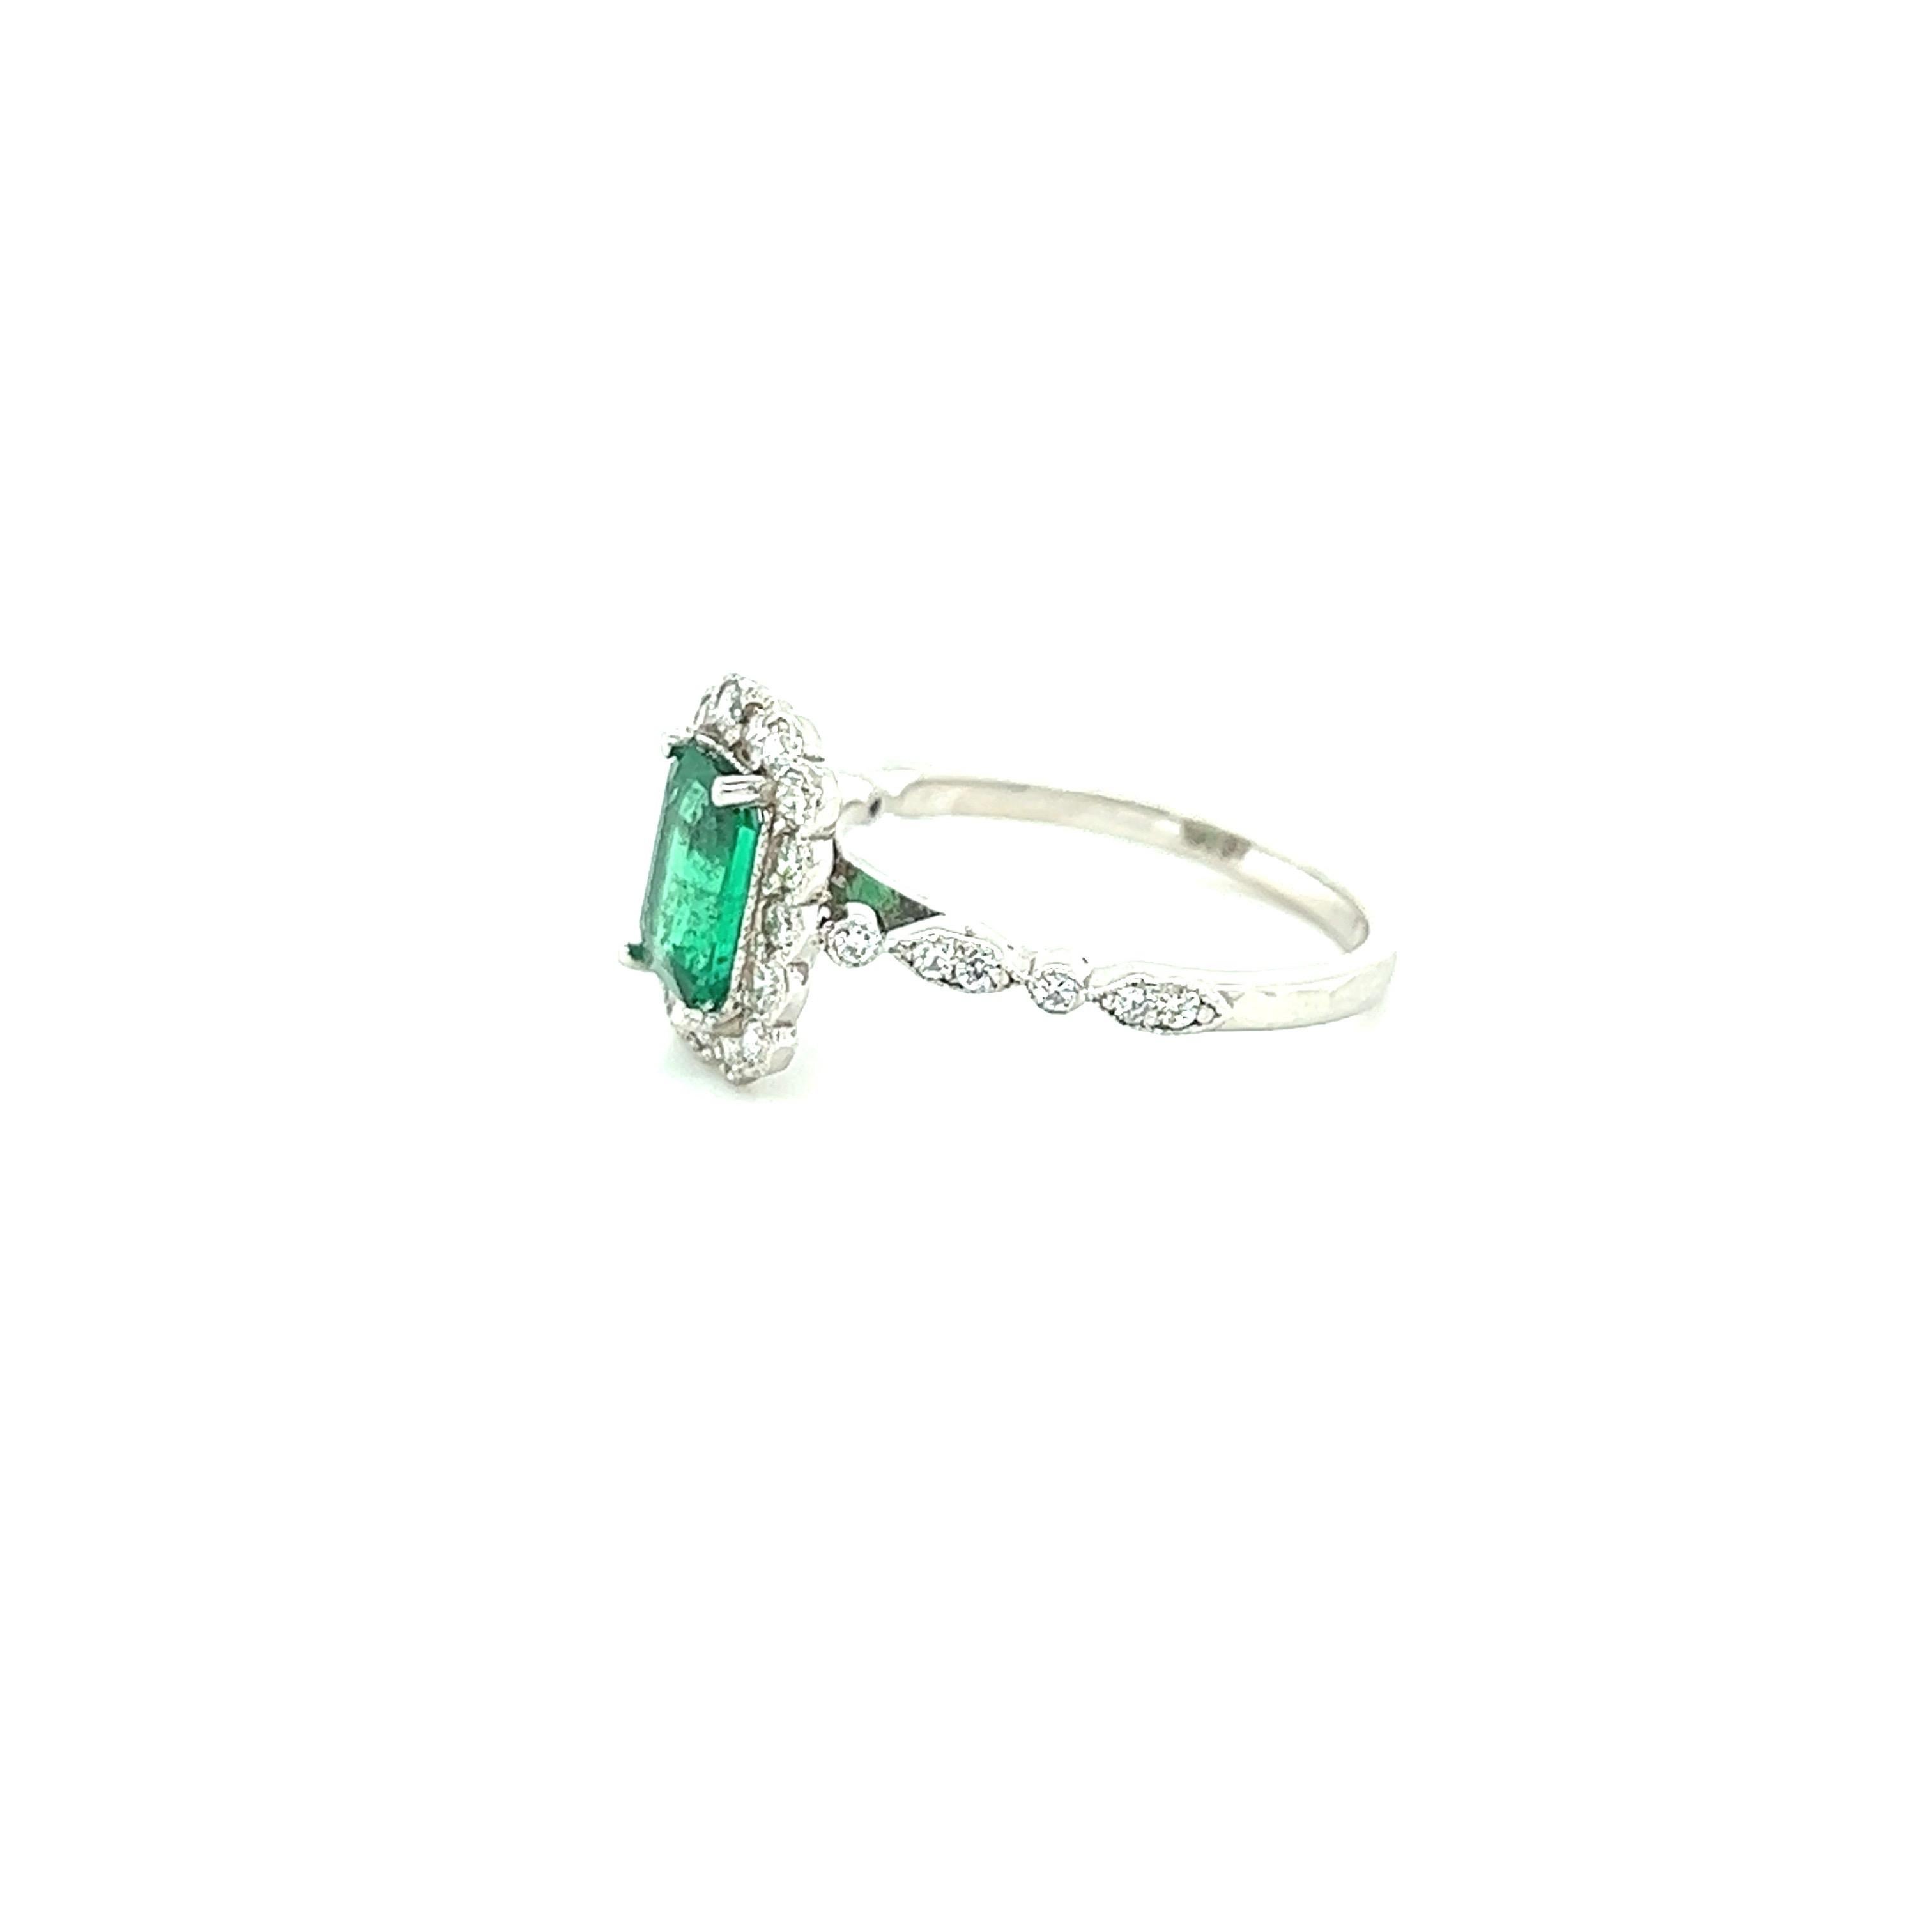 Contemporary GIA Certified 1.49 Carat Emerald Diamond White Gold Engagement Ring